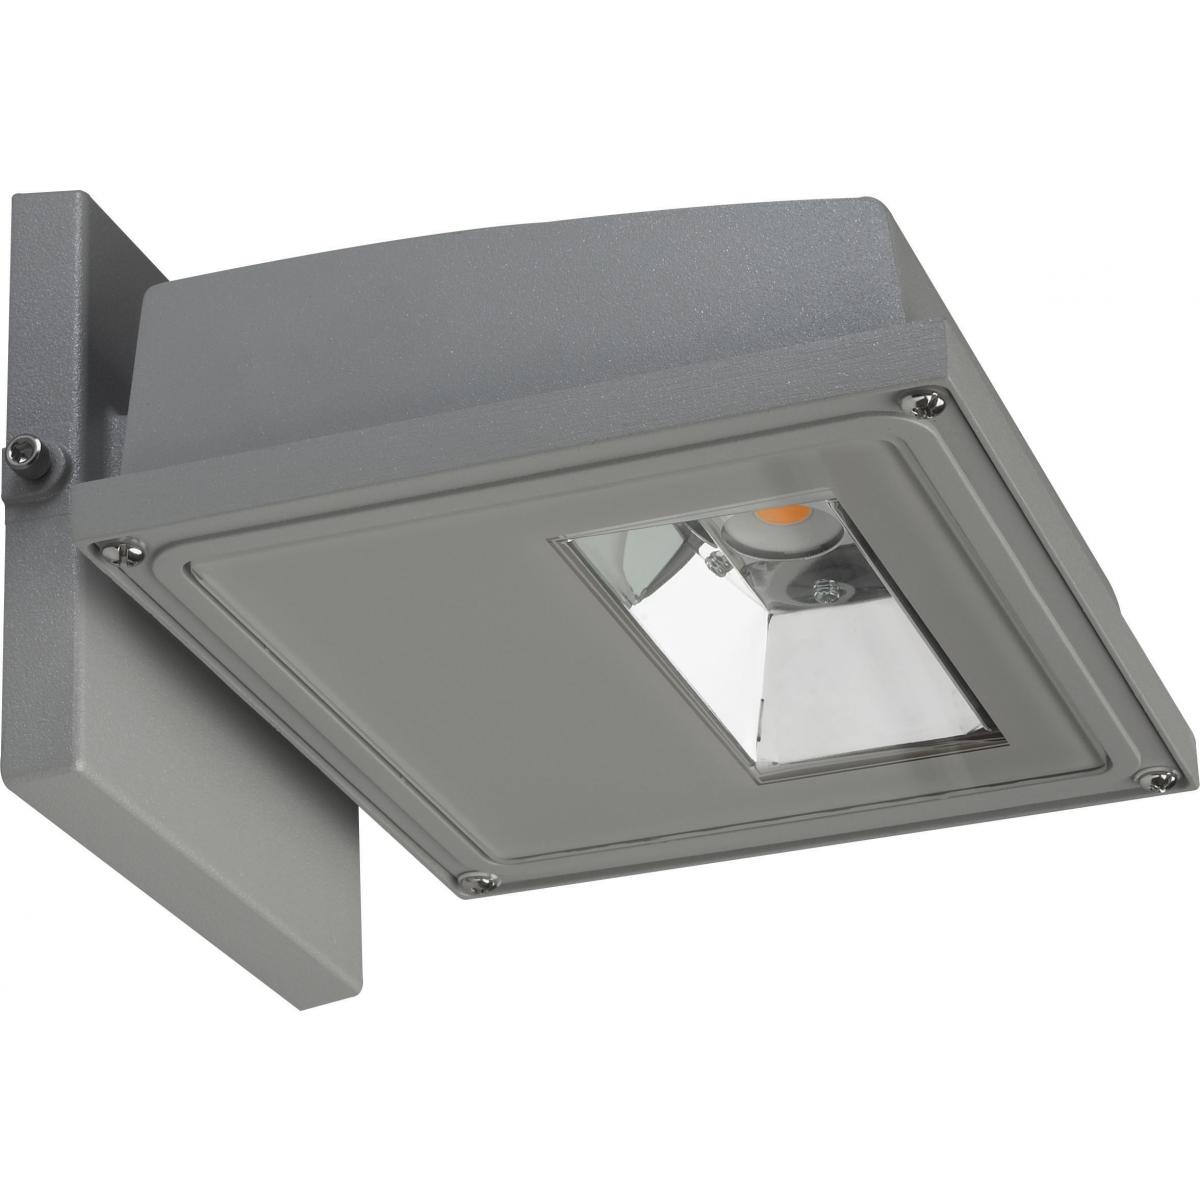 65-155 15W LED WALL PACK GRAY 3000K